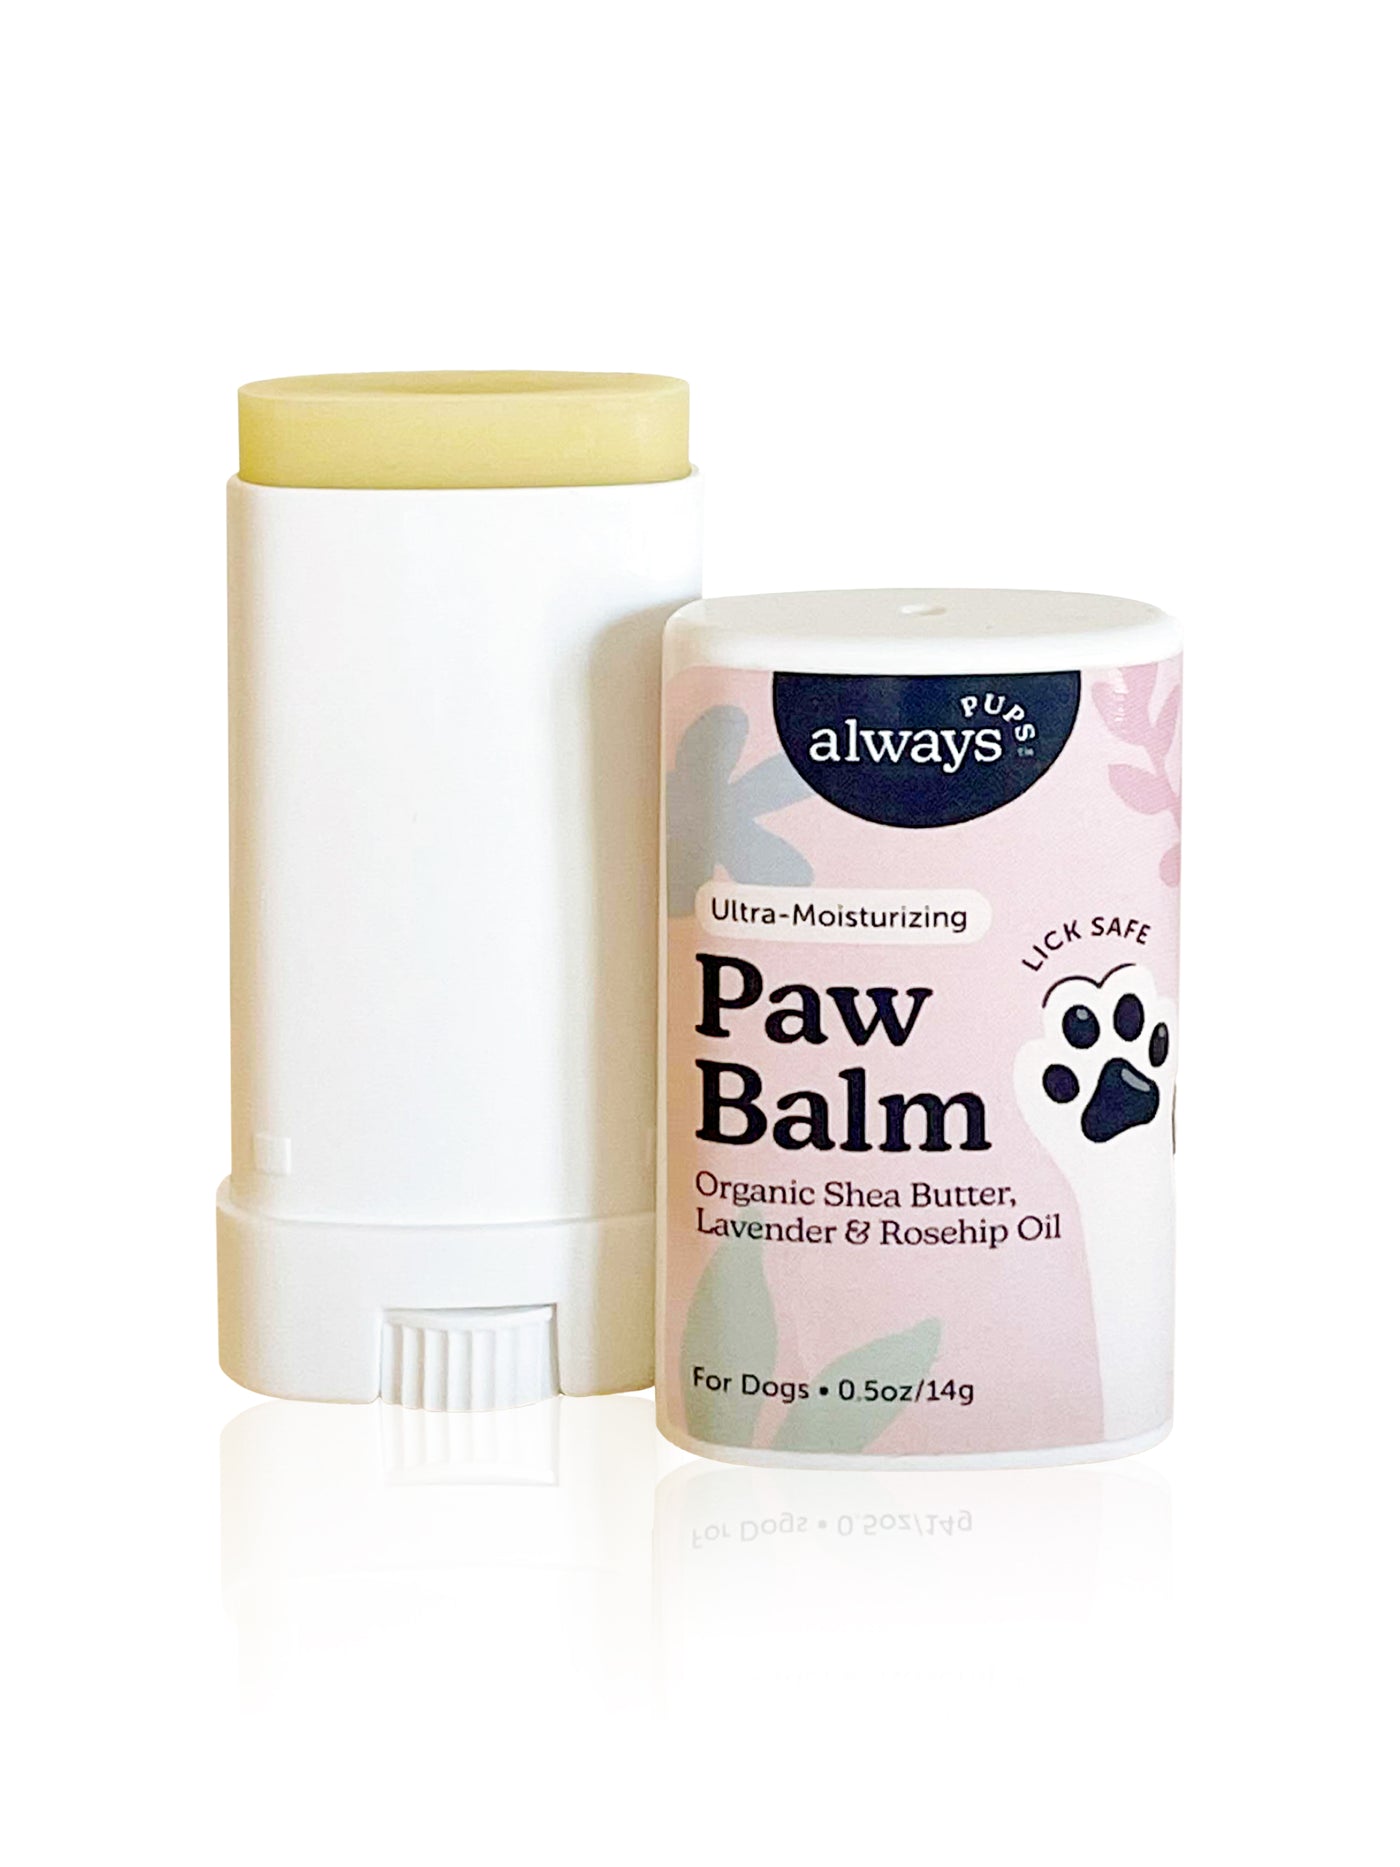 AlwaysPups All Natural Organic Paw Balm for Dogs - 0.5oz in a twist-up tube open and showing the content